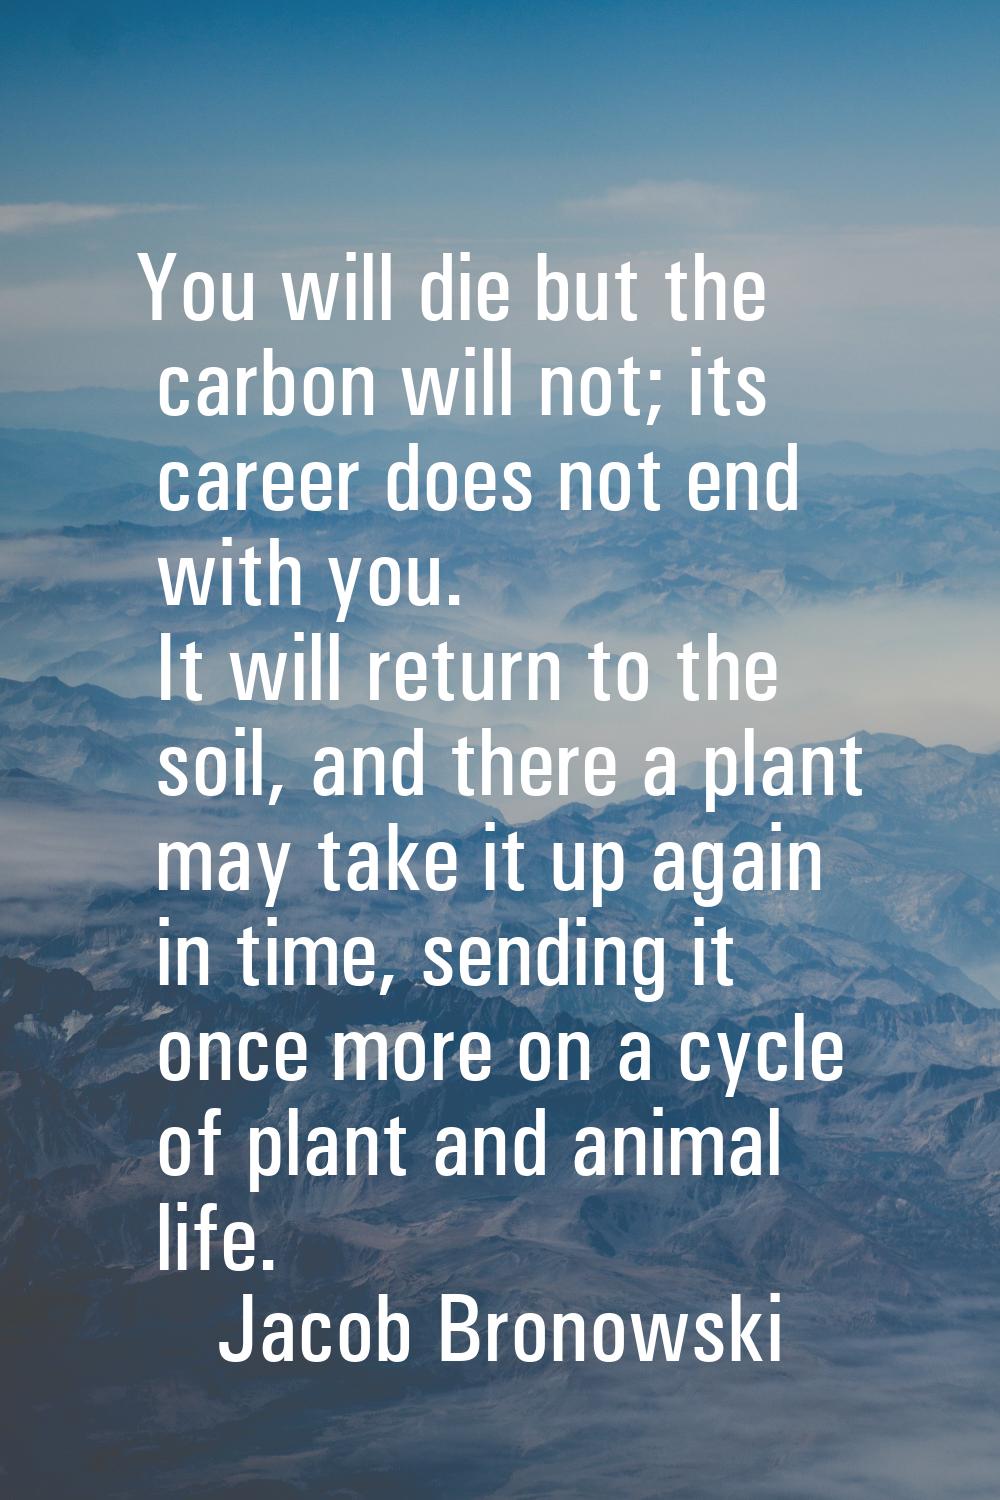 You will die but the carbon will not; its career does not end with you. It will return to the soil,